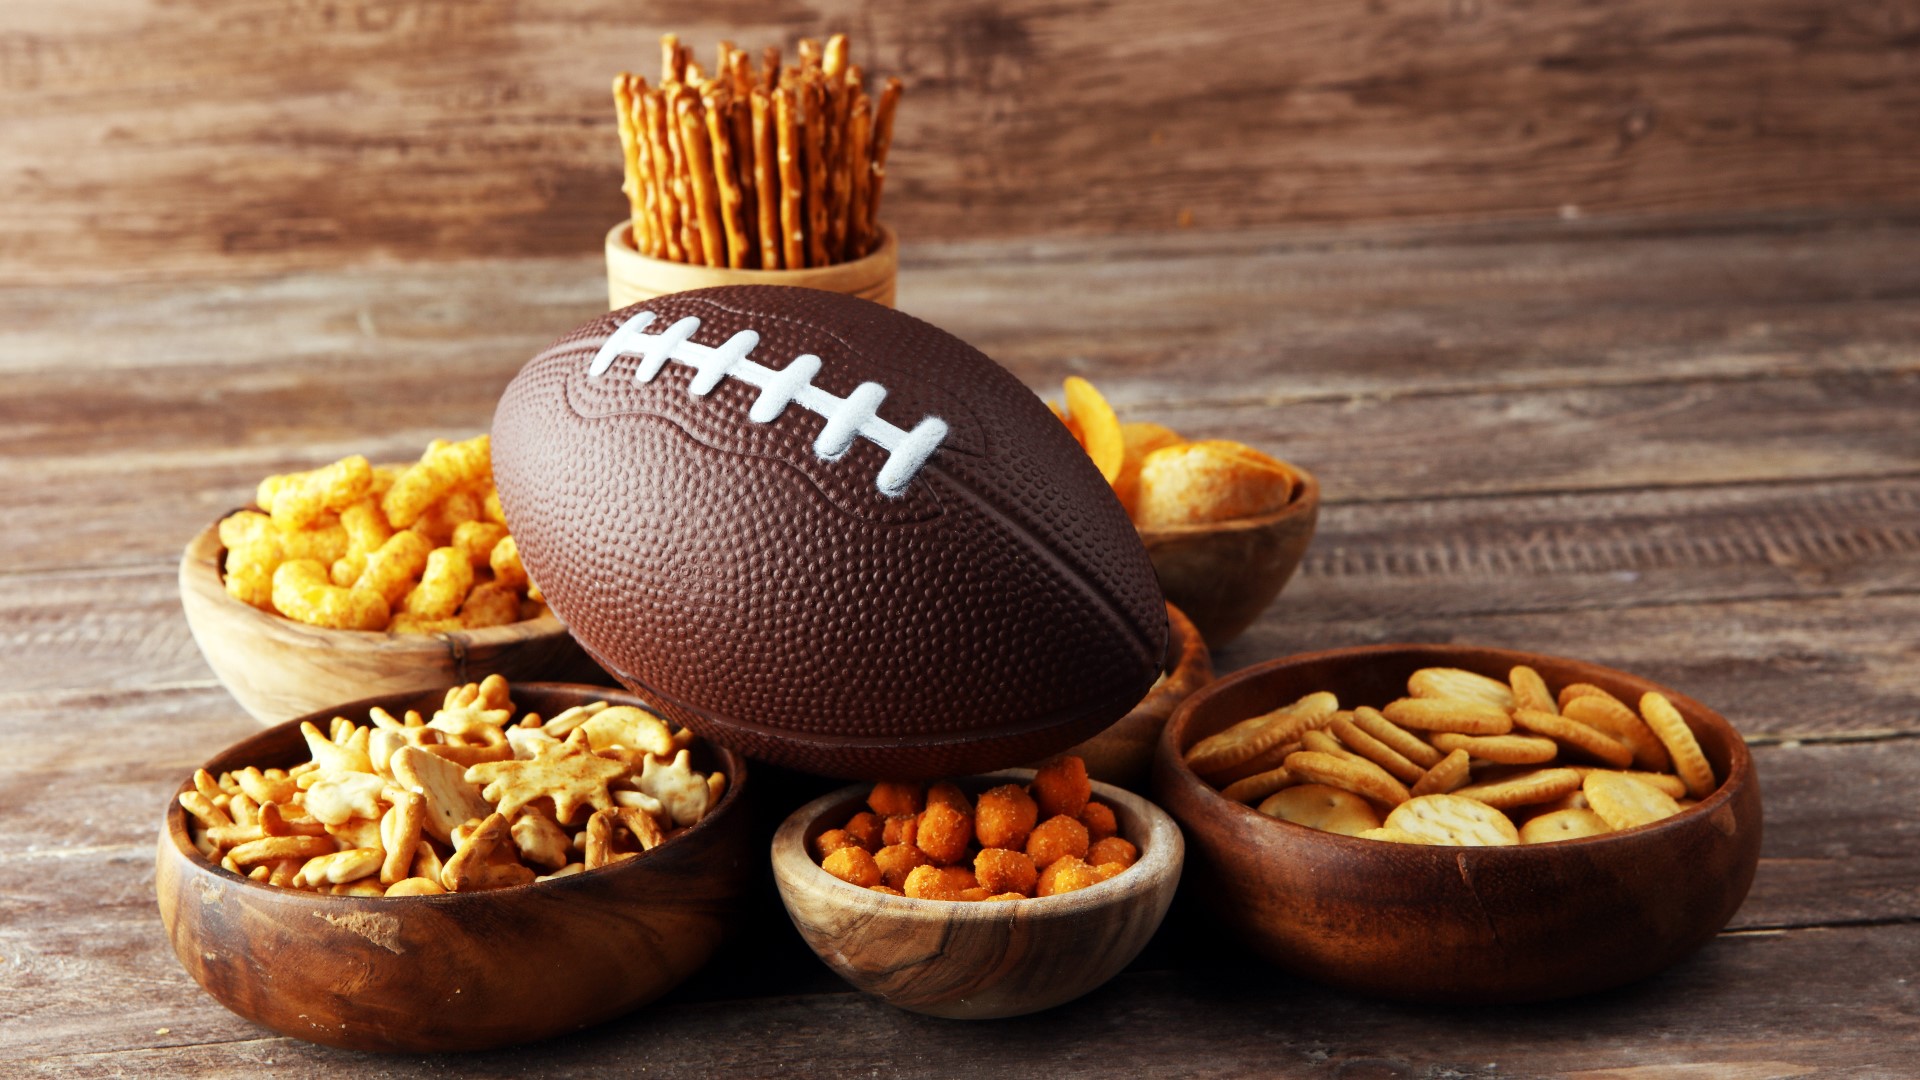 Sponsored by: Limor Media and Tostitos. Lifestyle Contributor Limor Suss shares game day snacks for football season. For more info go to limor.tv.